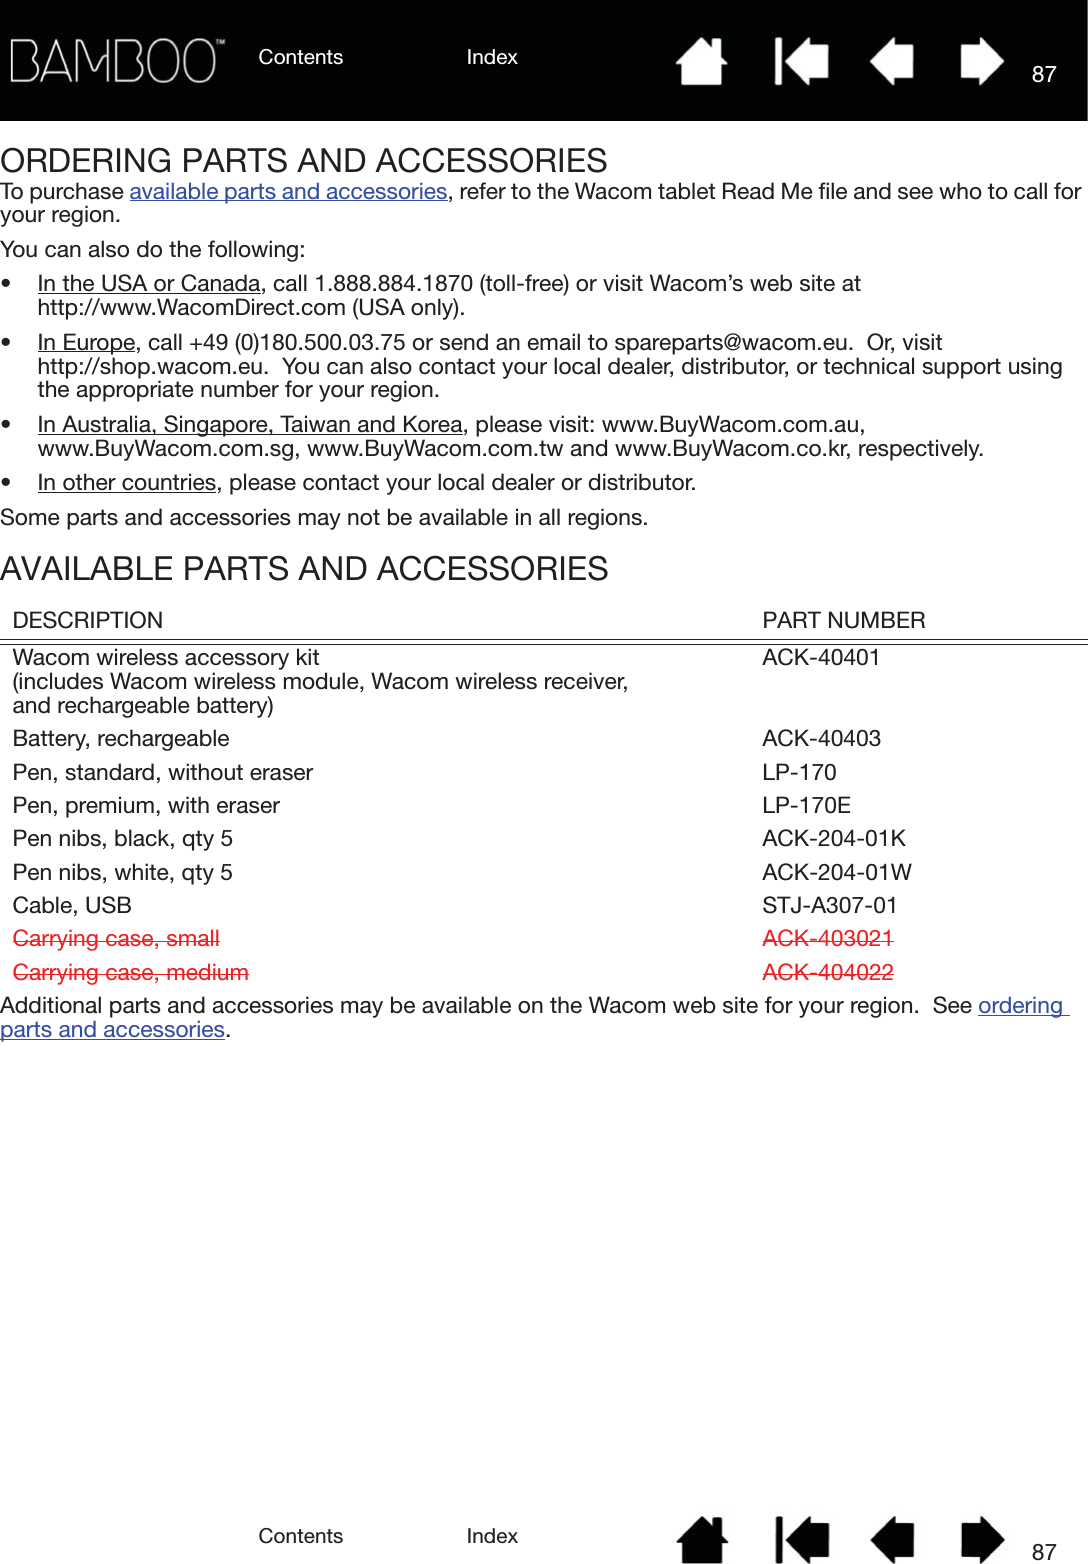 Contents IndexContents 87Index87ORDERING PARTS AND ACCESSORIESTo purchase available parts and accessories, refer to the Wacom tablet Read Me file and see who to call for your region.You can also do the following:• In the USA or Canada, call 1.888.884.1870 (toll-free) or visit Wacom’s web site at http://www.WacomDirect.com (USA only).• In Europe, call +49 (0)180.500.03.75 or send an email to spareparts@wacom.eu.  Or, visit http://shop.wacom.eu.  You can also contact your local dealer, distributor, or technical support using the appropriate number for your region.• In Australia, Singapore, Taiwan and Korea, please visit: www.BuyWacom.com.au, www.BuyWacom.com.sg, www.BuyWacom.com.tw and www.BuyWacom.co.kr, respectively.• In other countries, please contact your local dealer or distributor.Some parts and accessories may not be available in all regions.AVAILABLE PARTS AND ACCESSORIESAdditional parts and accessories may be available on the Wacom web site for your region.  See ordering parts and accessories.DESCRIPTION PART NUMBERWacom wireless accessory kit (includes Wacom wireless module, Wacom wireless receiver, and rechargeable battery)ACK-40401Battery, rechargeable ACK-40403Pen, standard, without eraser LP-170Pen, premium, with eraser LP-170EPen nibs, black, qty 5 ACK-204-01KPen nibs, white, qty 5 ACK-204-01WCable, USB STJ-A307-01Carrying case, small ACK-403021Carrying case, medium ACK-404022